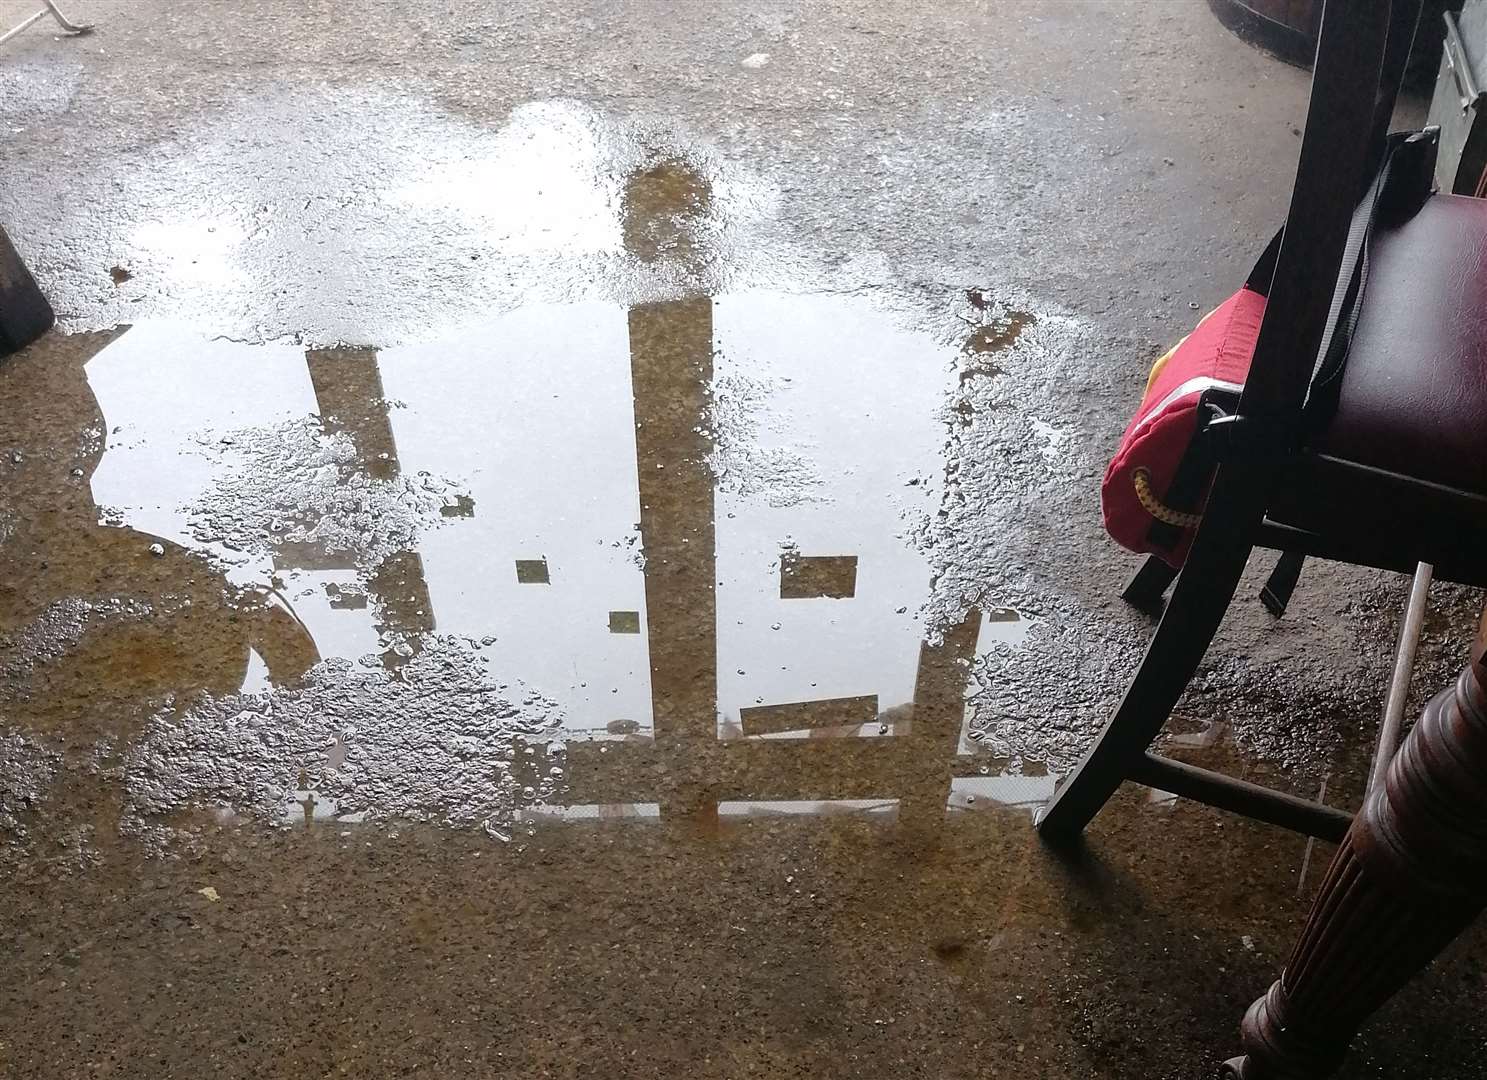 Water leaking in the Harbour Arm micropub